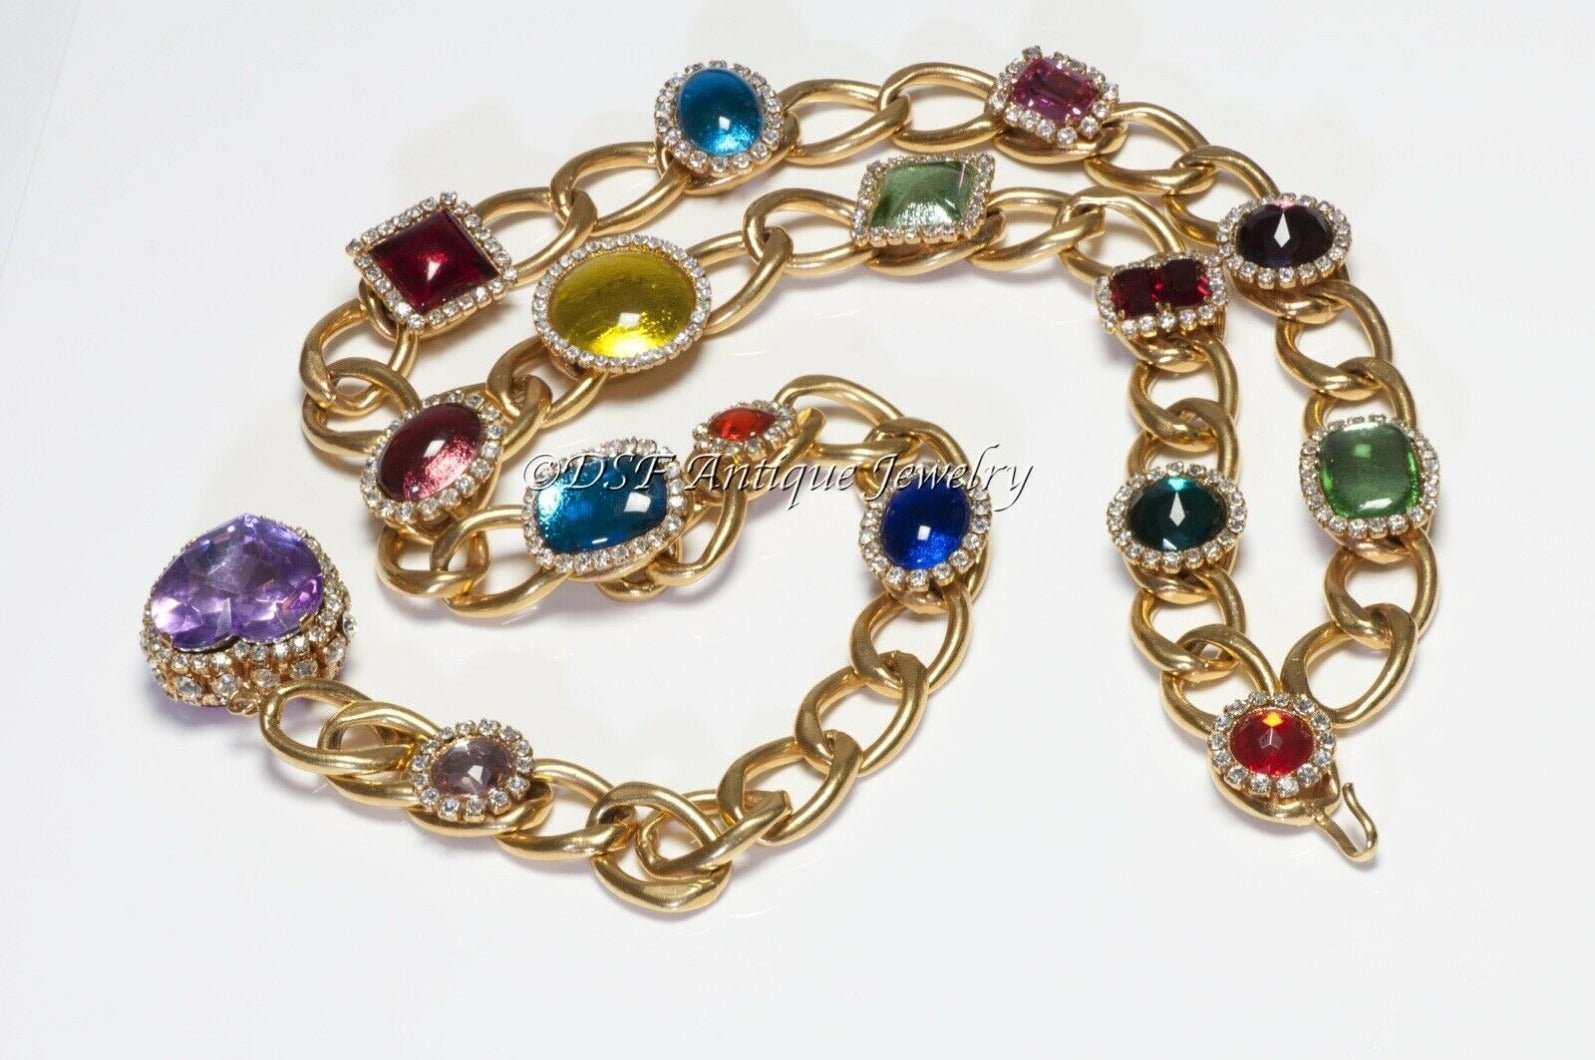 CHANEL Spring 1995 Multicolored Crystal Lucite Heart Chain Belt